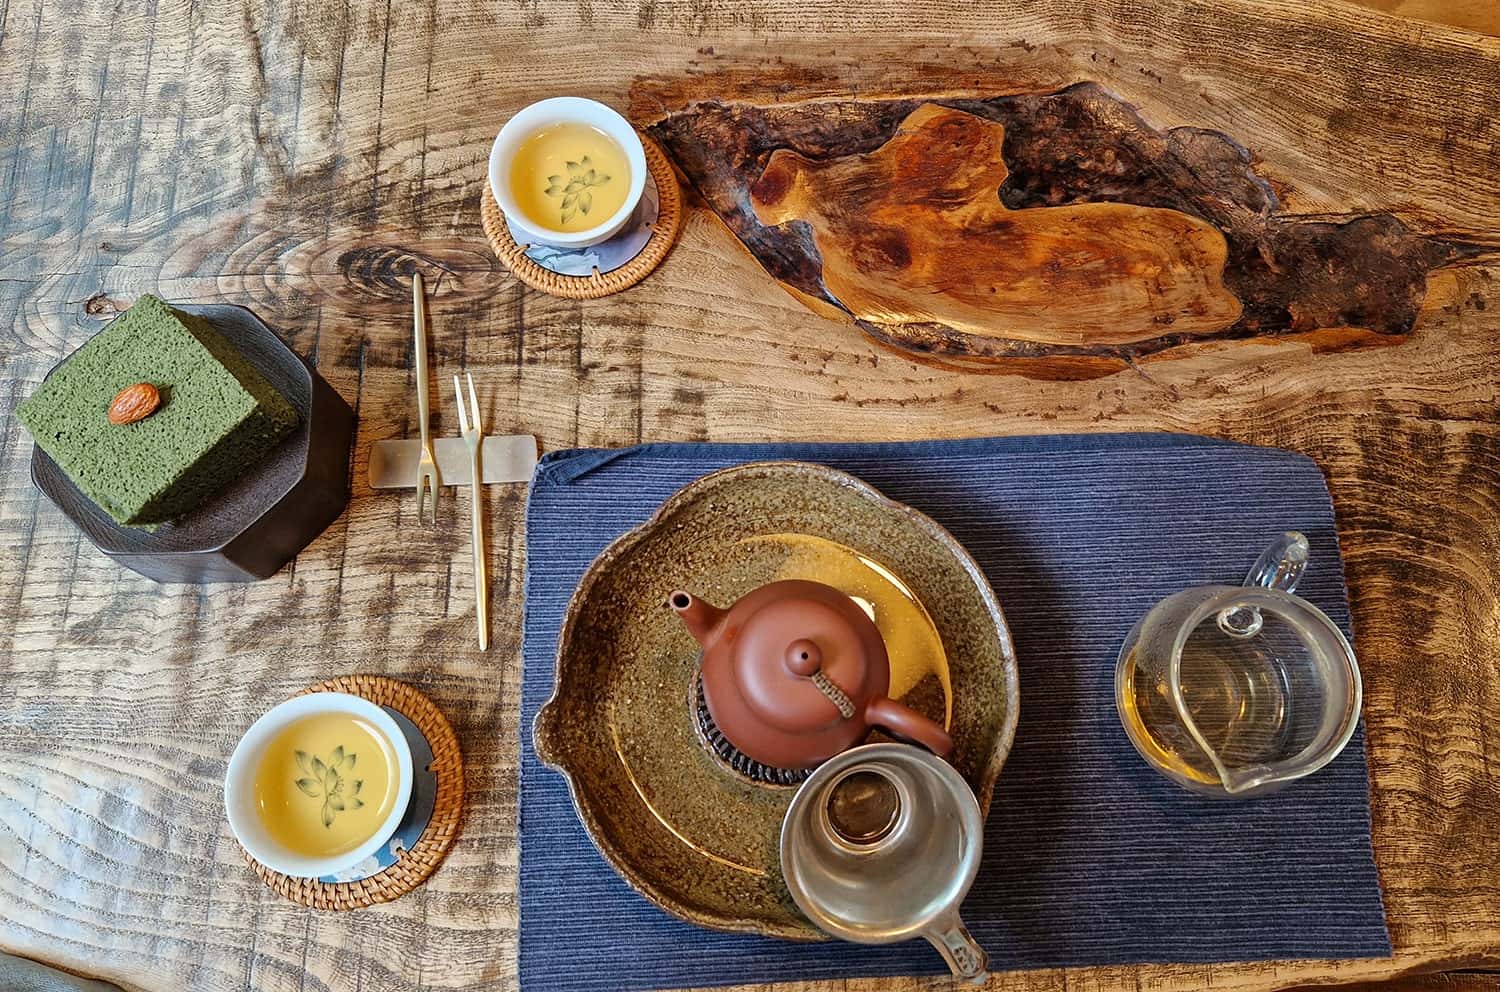 traditional Korean tea pot, cups and mugwort sponge cake on a wooden table seen from above